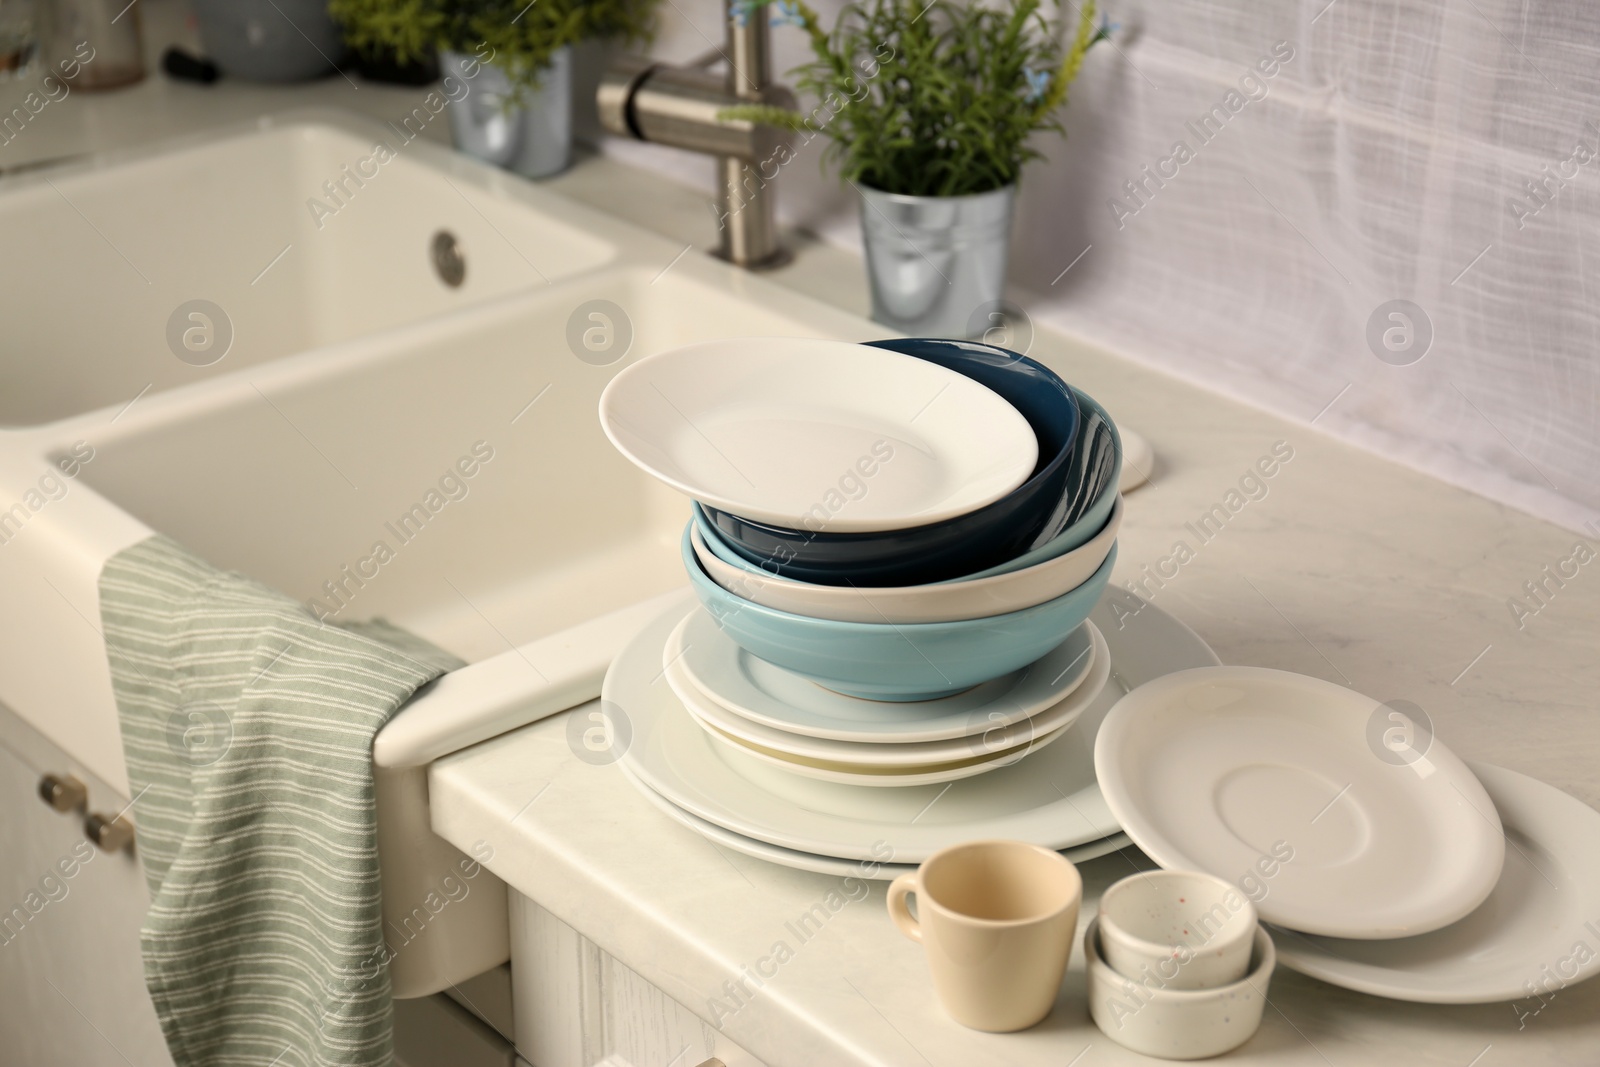 Photo of Set of clean dishware near sink on white countertop in kitchen